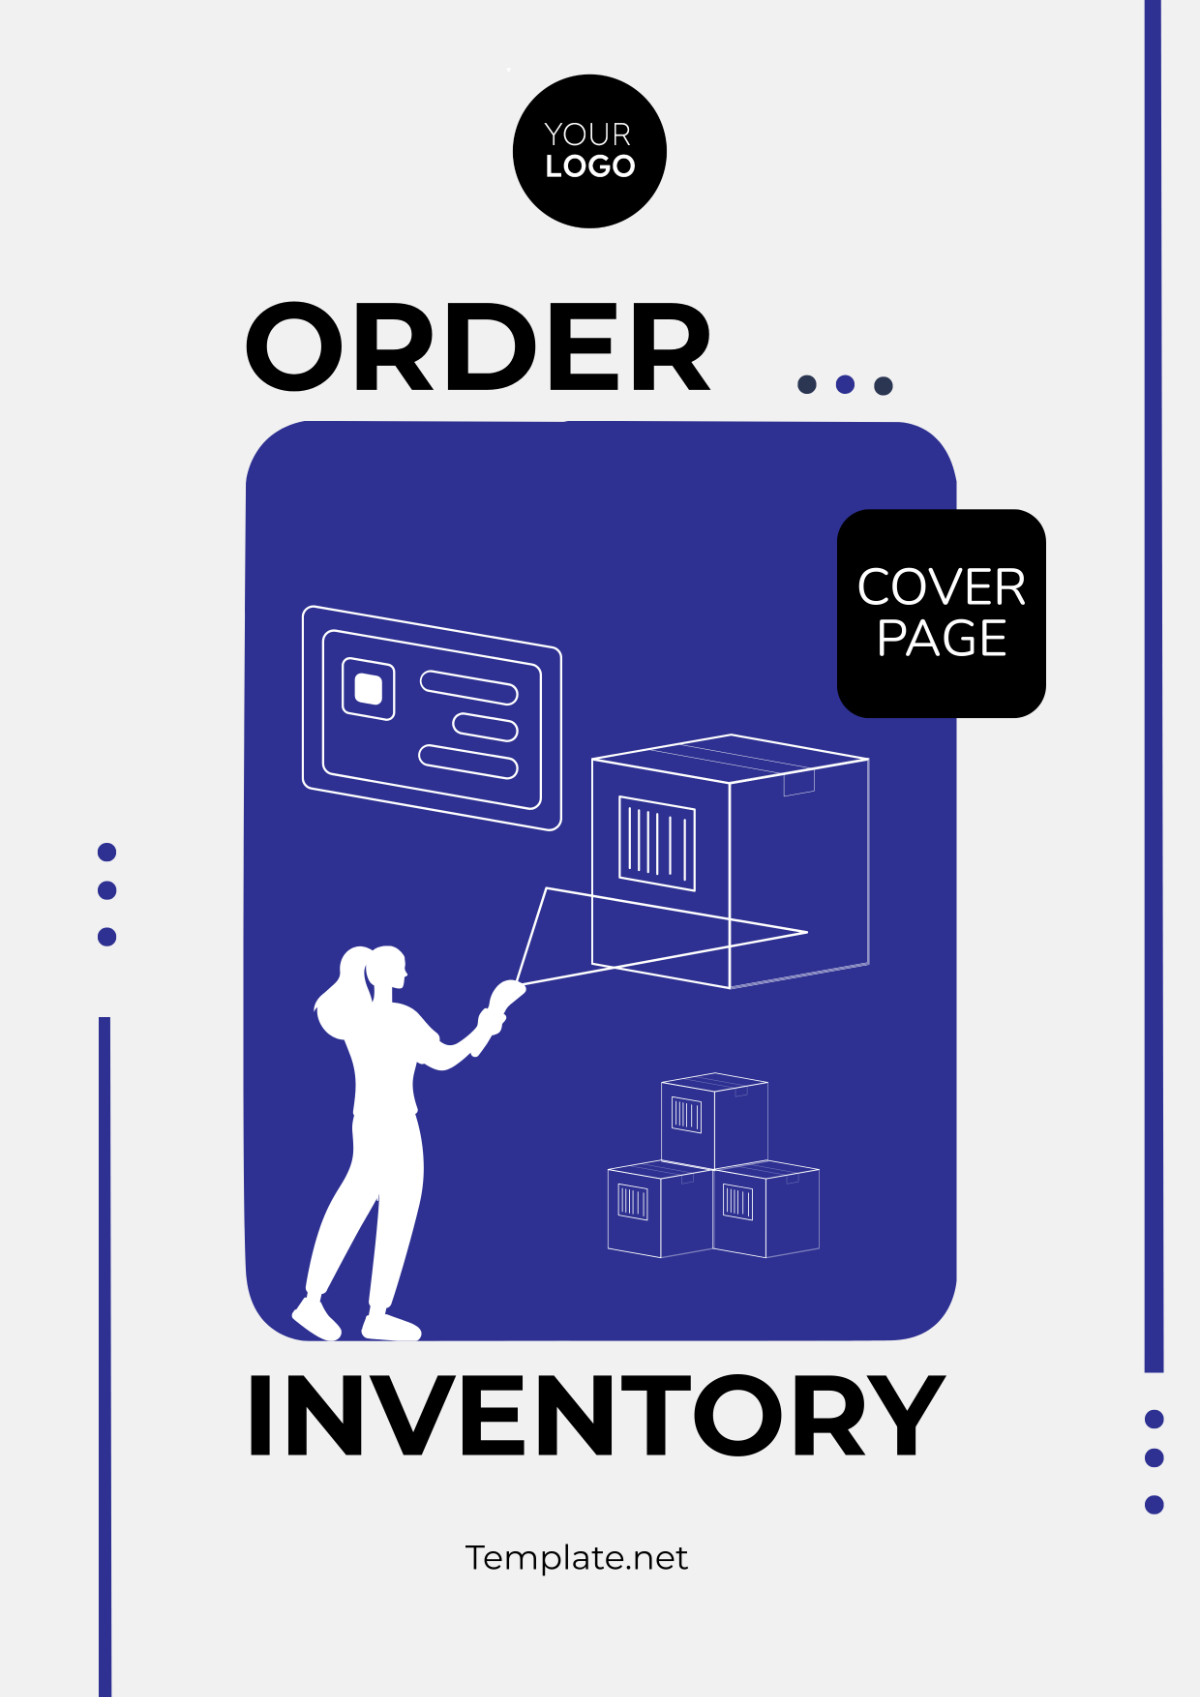 Order Inventory Cover Page